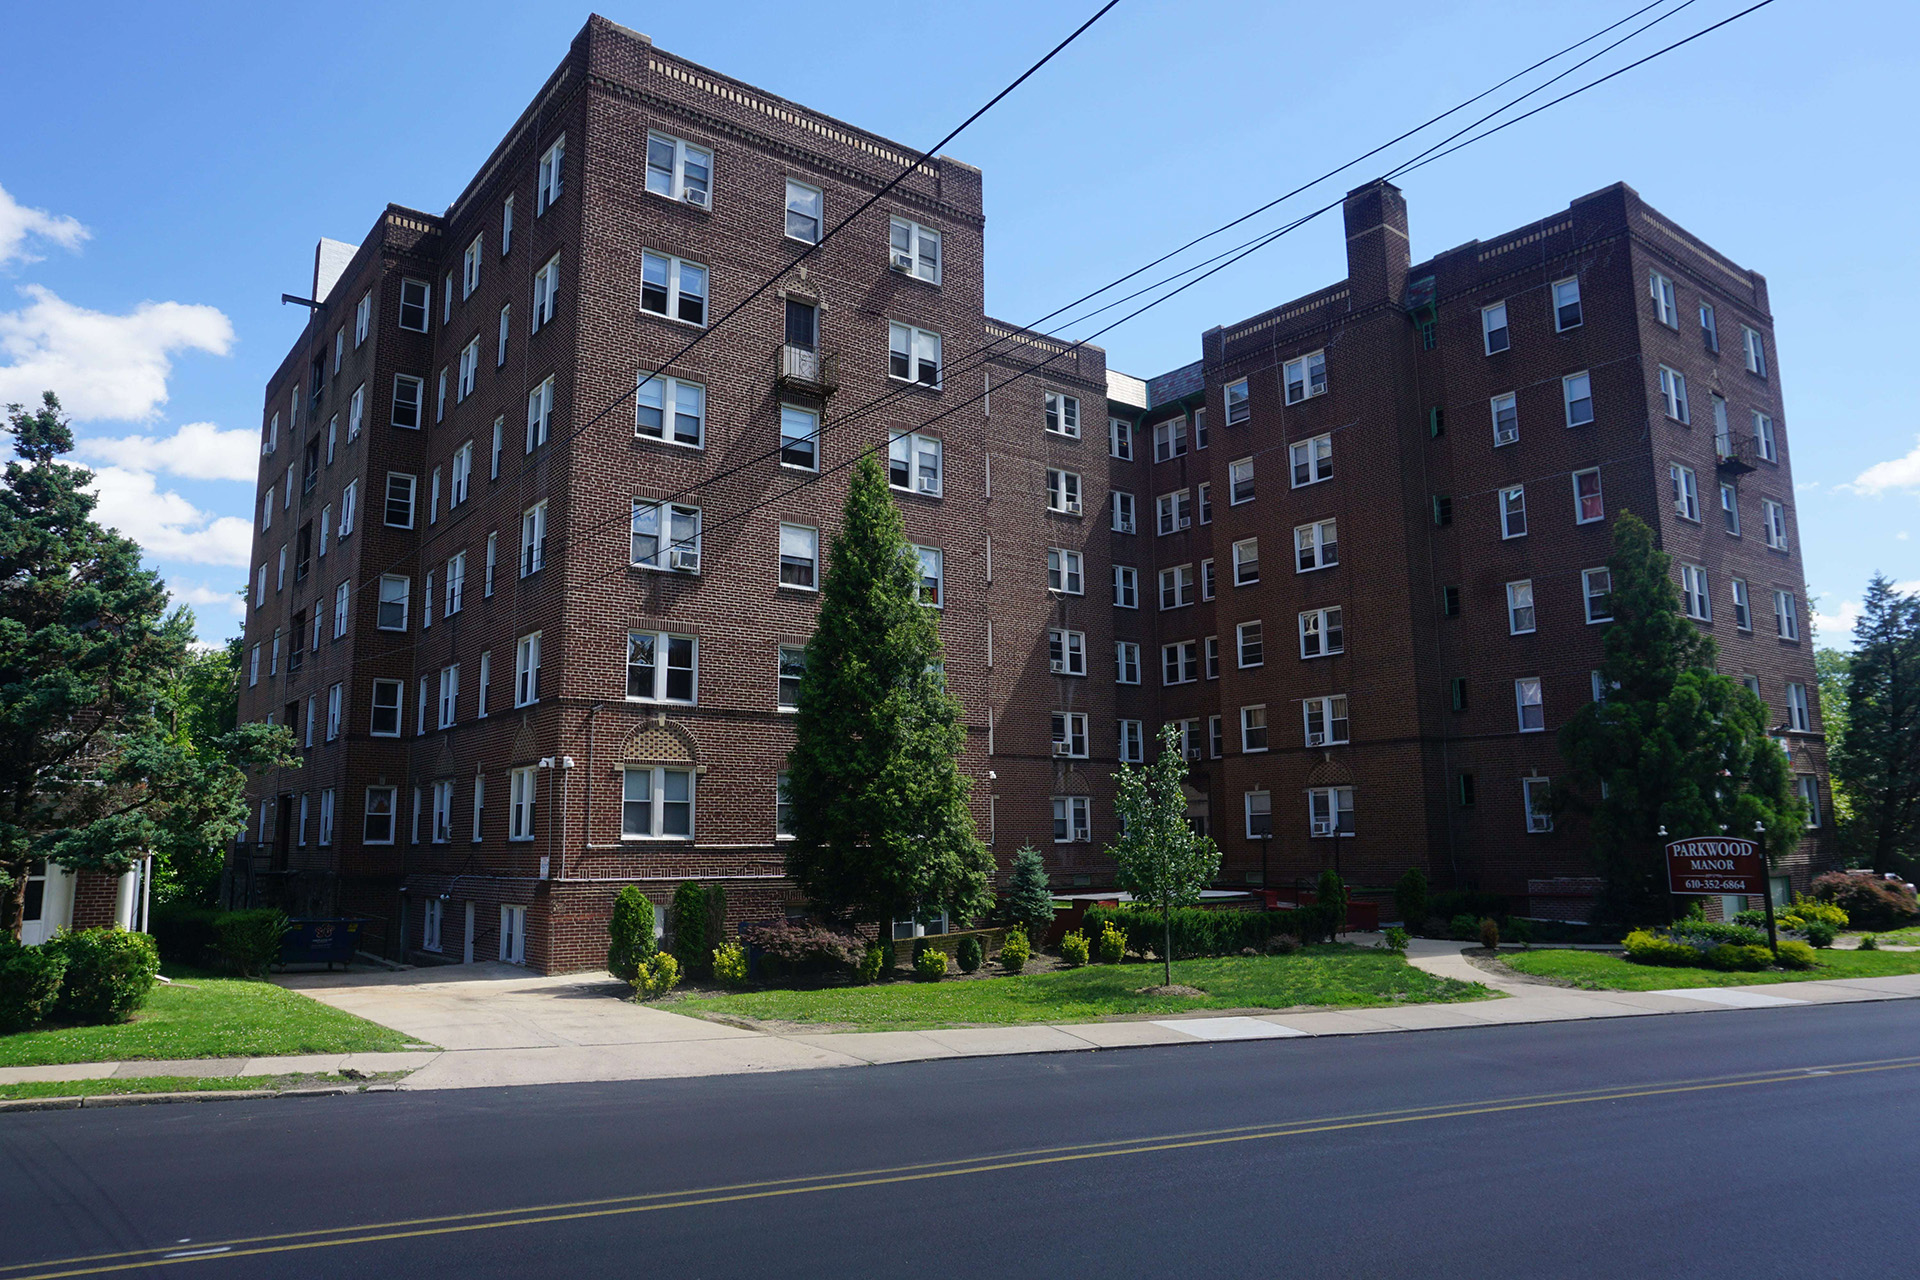 Penzel Manor Apartments in Upper Darby, PA